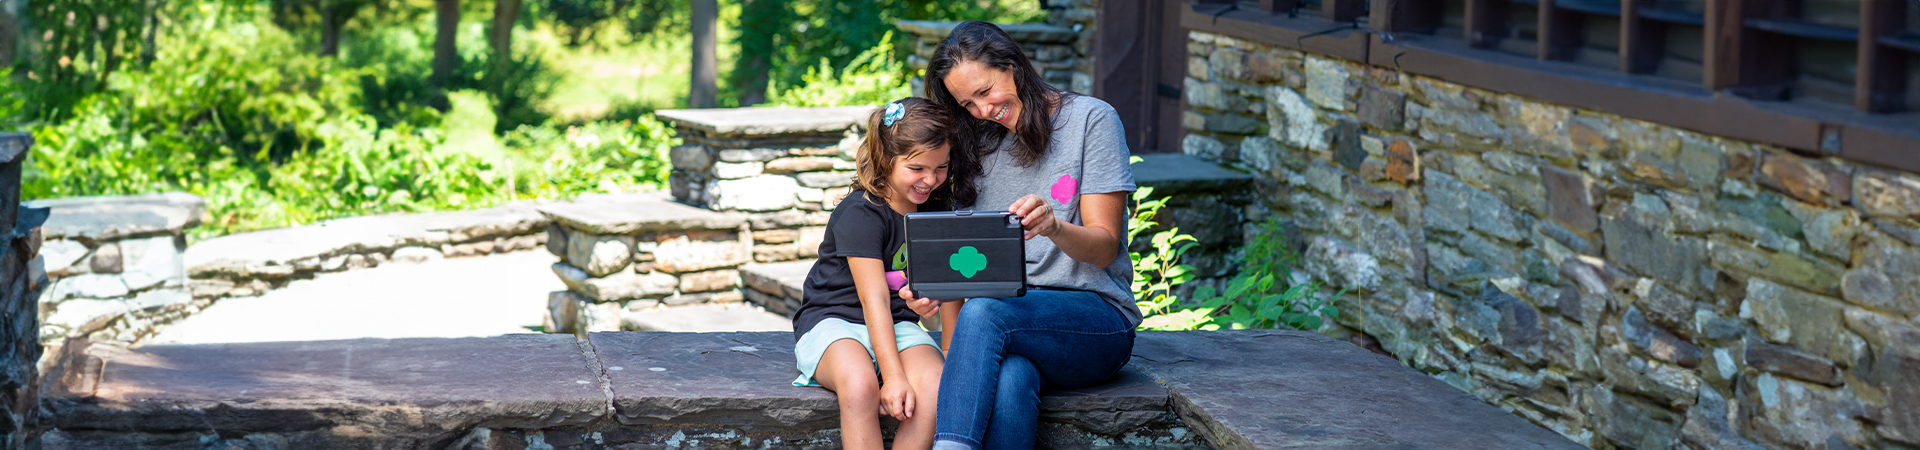  mother and daughter Girl Scout sitting outside looking at something on a tablet device 